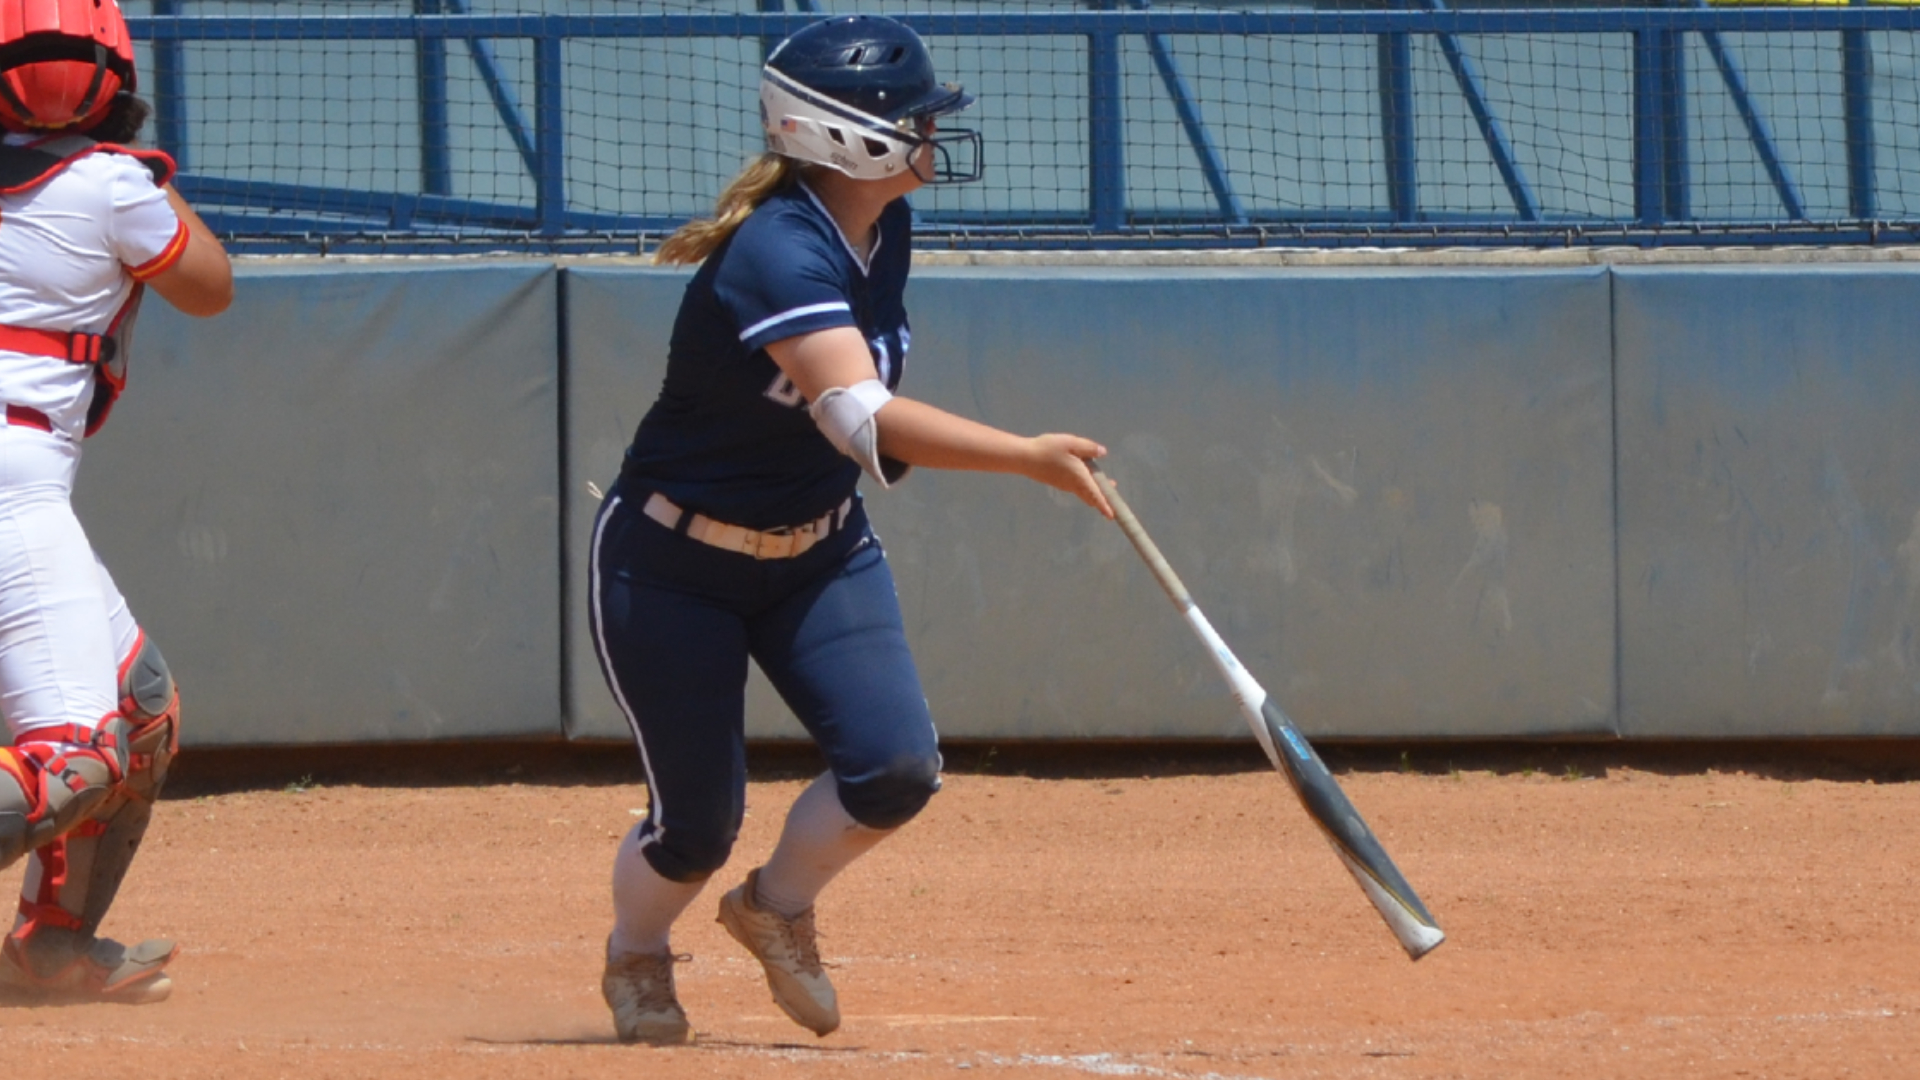 UD Softball Closes Home Regular Season this Weekend vs. Schreiner; 5 Seniors to be Recognized Sunday